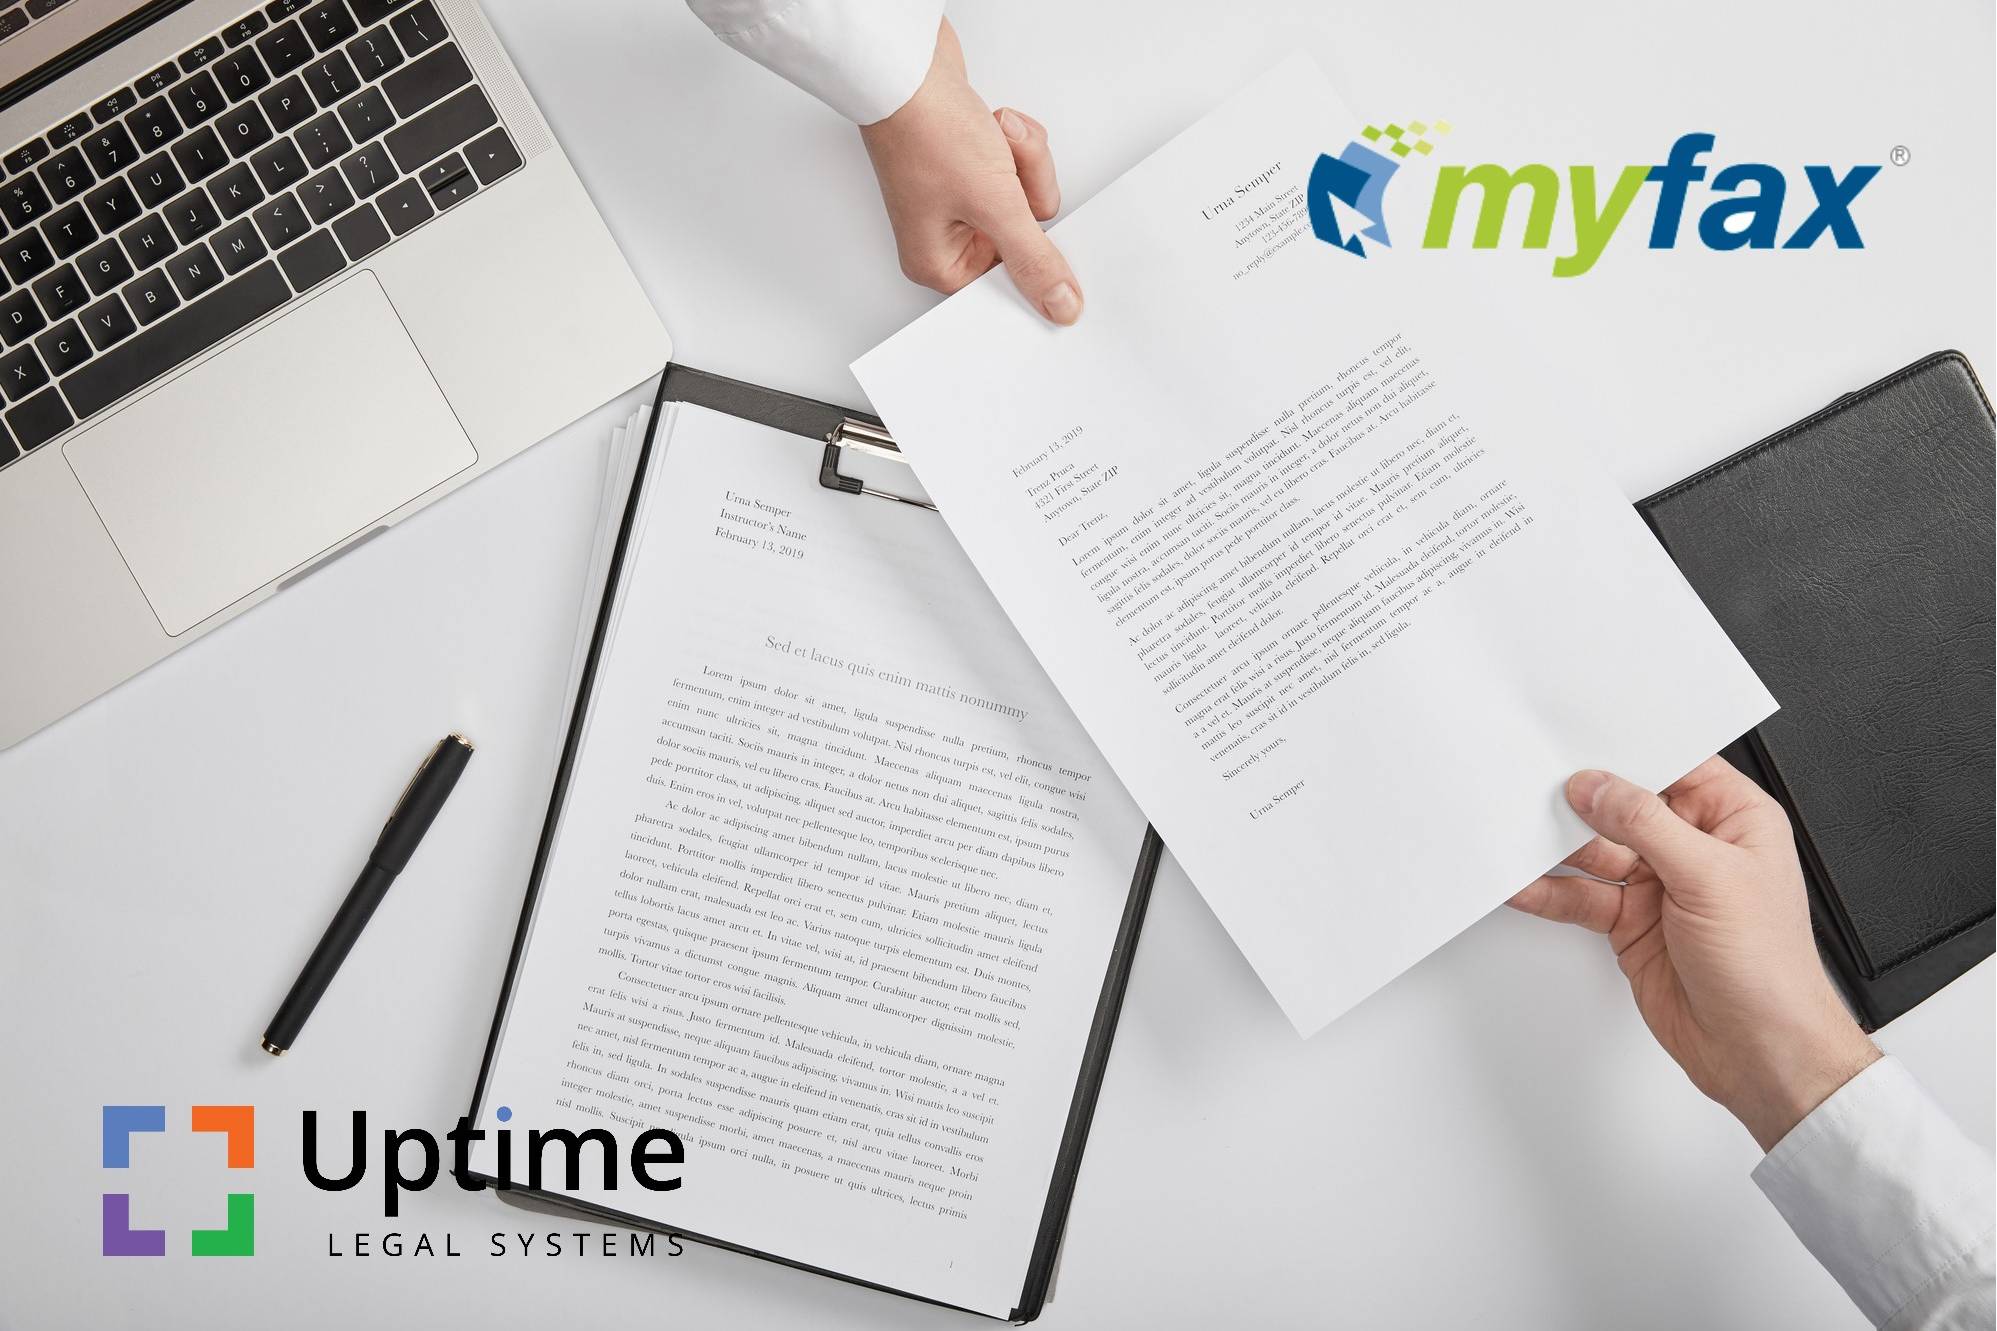 myfax review